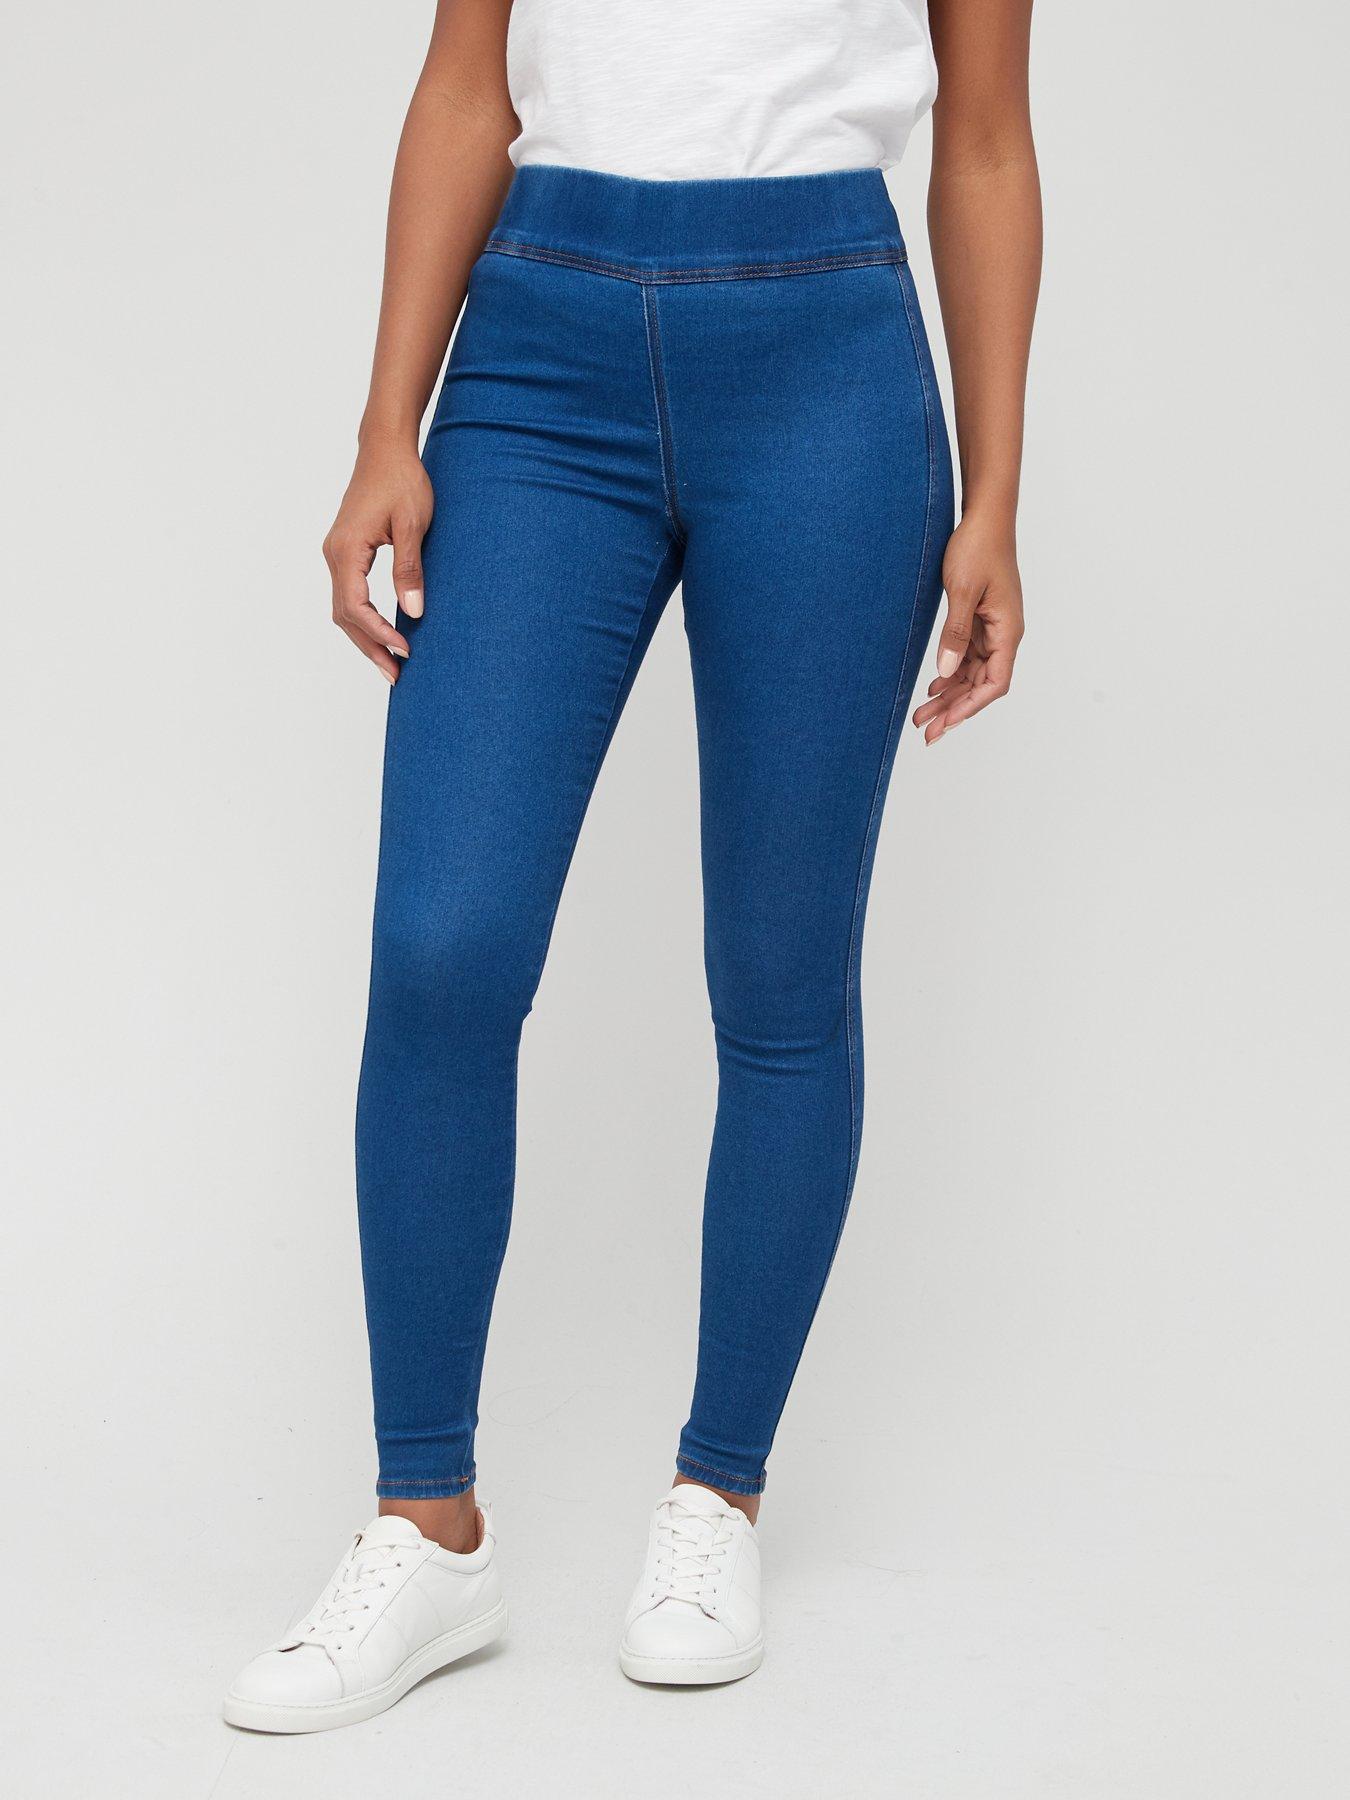 jegging jeans for ladies